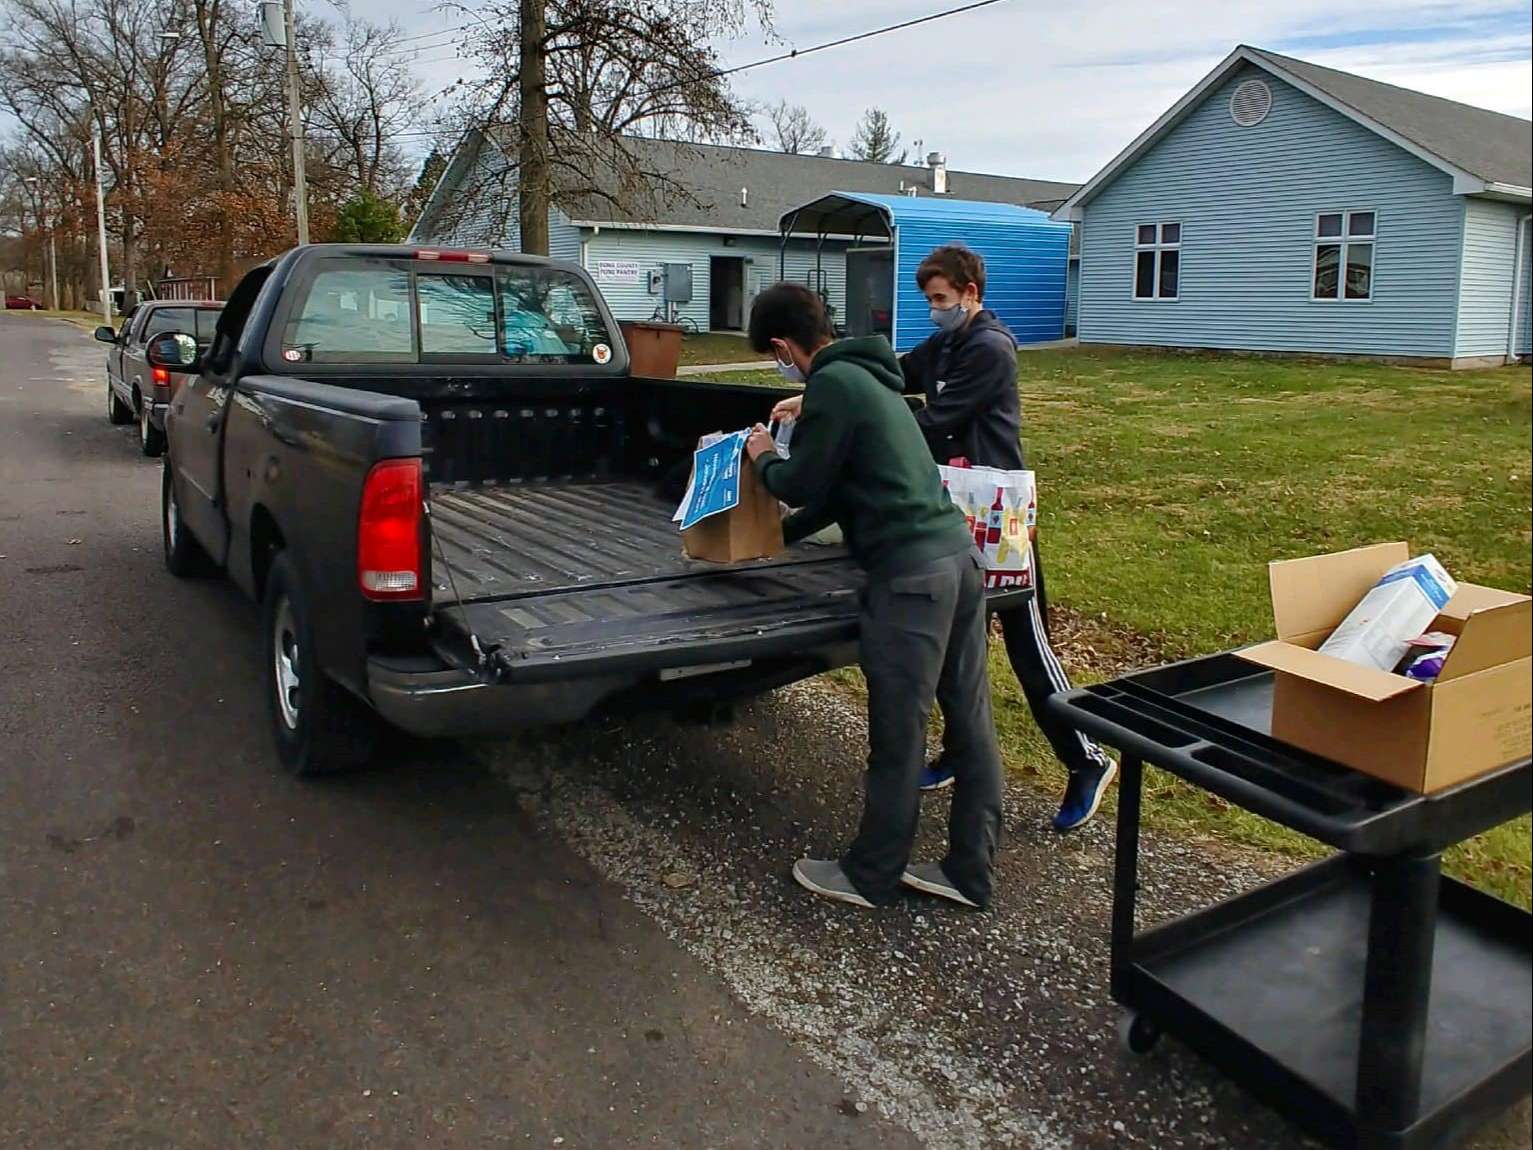 Bond County Food Pantry volunteers load shelf stable food items into a client's truckbed